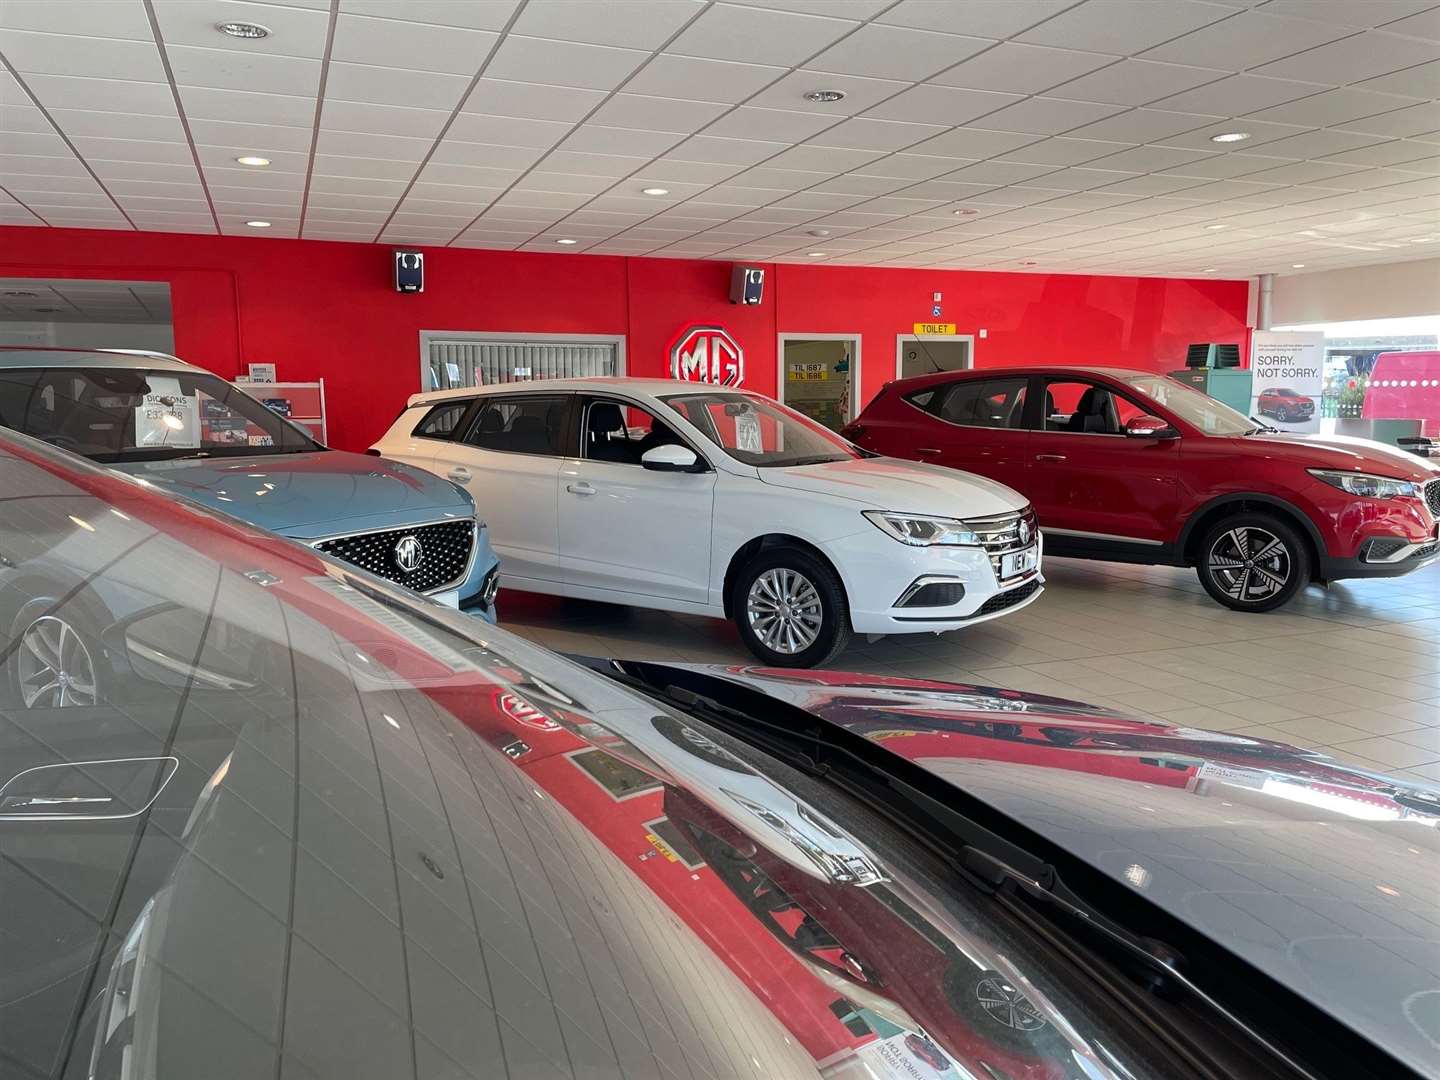 The MG Group offers a range of six models, including electric power cars.